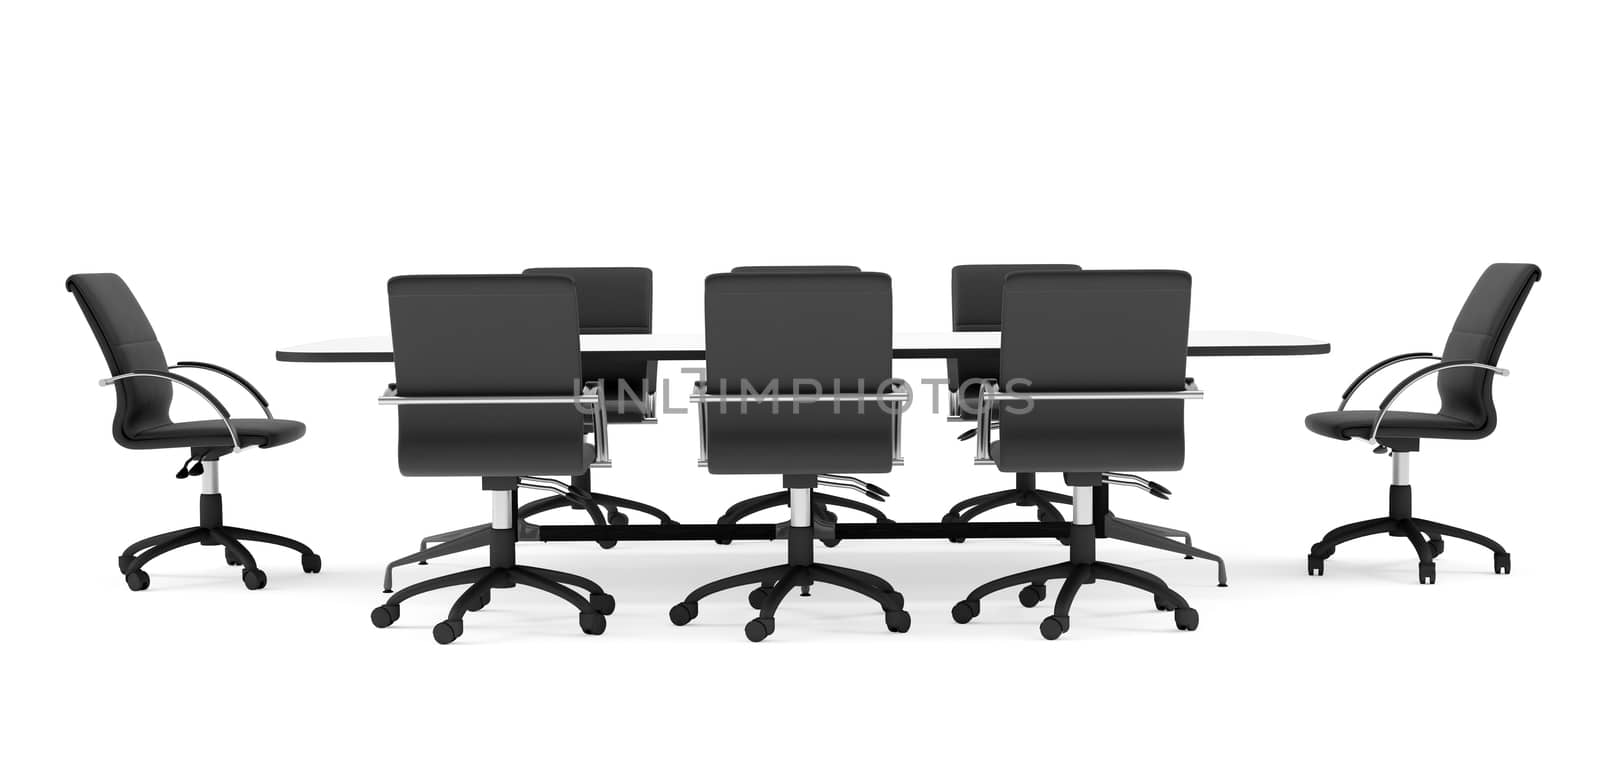 Conference table and black office chairs. Front view. Isolated render on white background